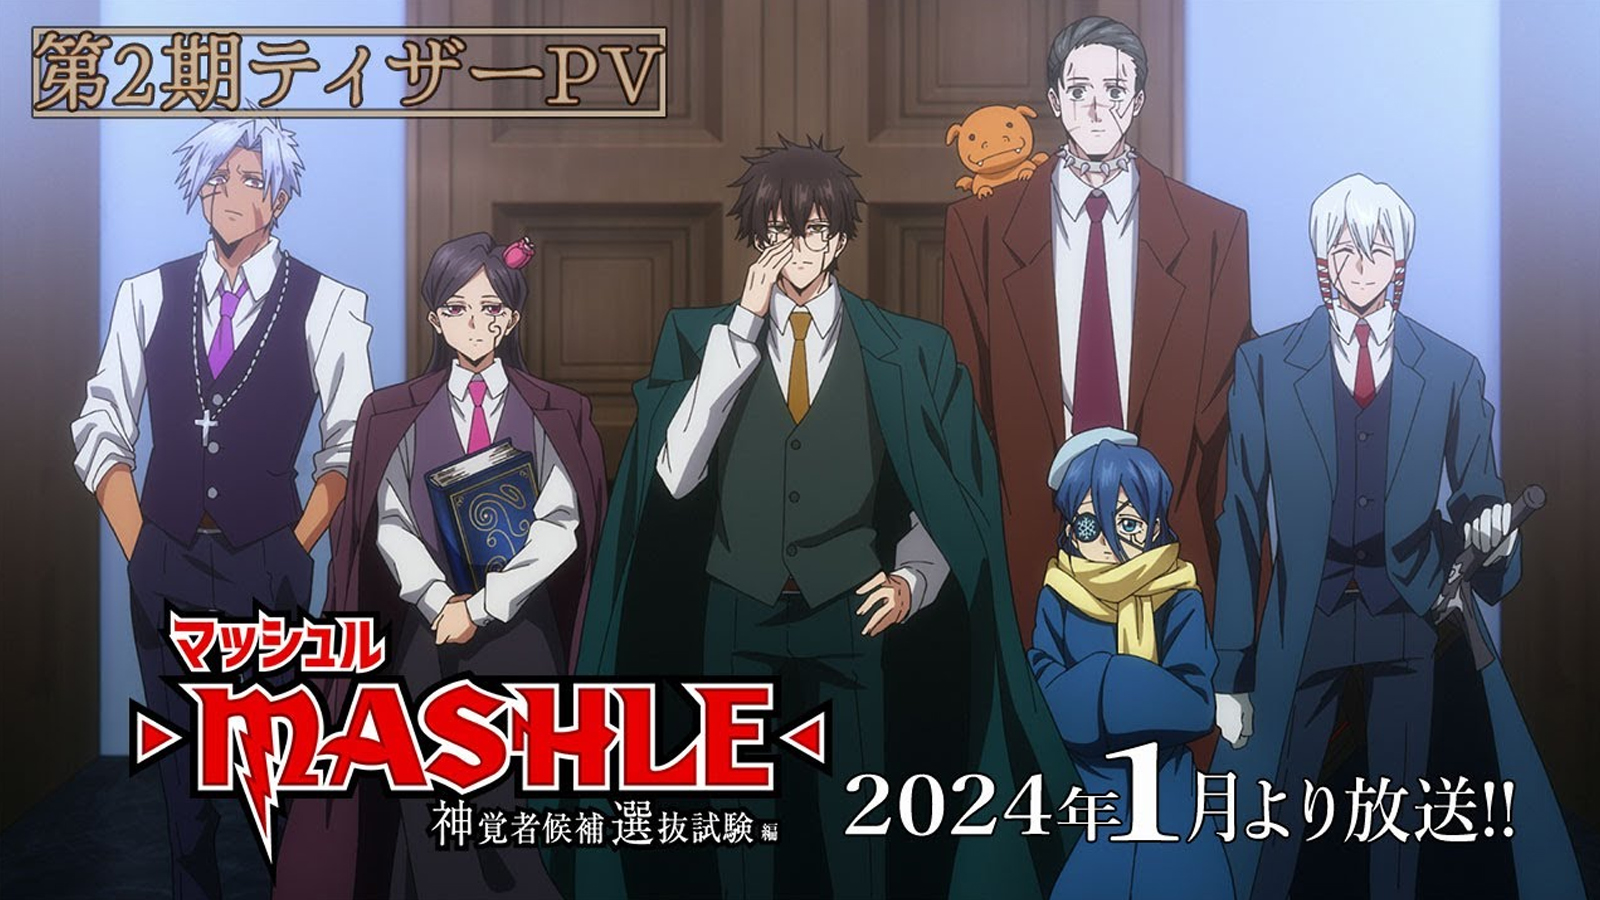 Mashle: Magic and Muscles Releases New Character Designs for Season 2  Characters